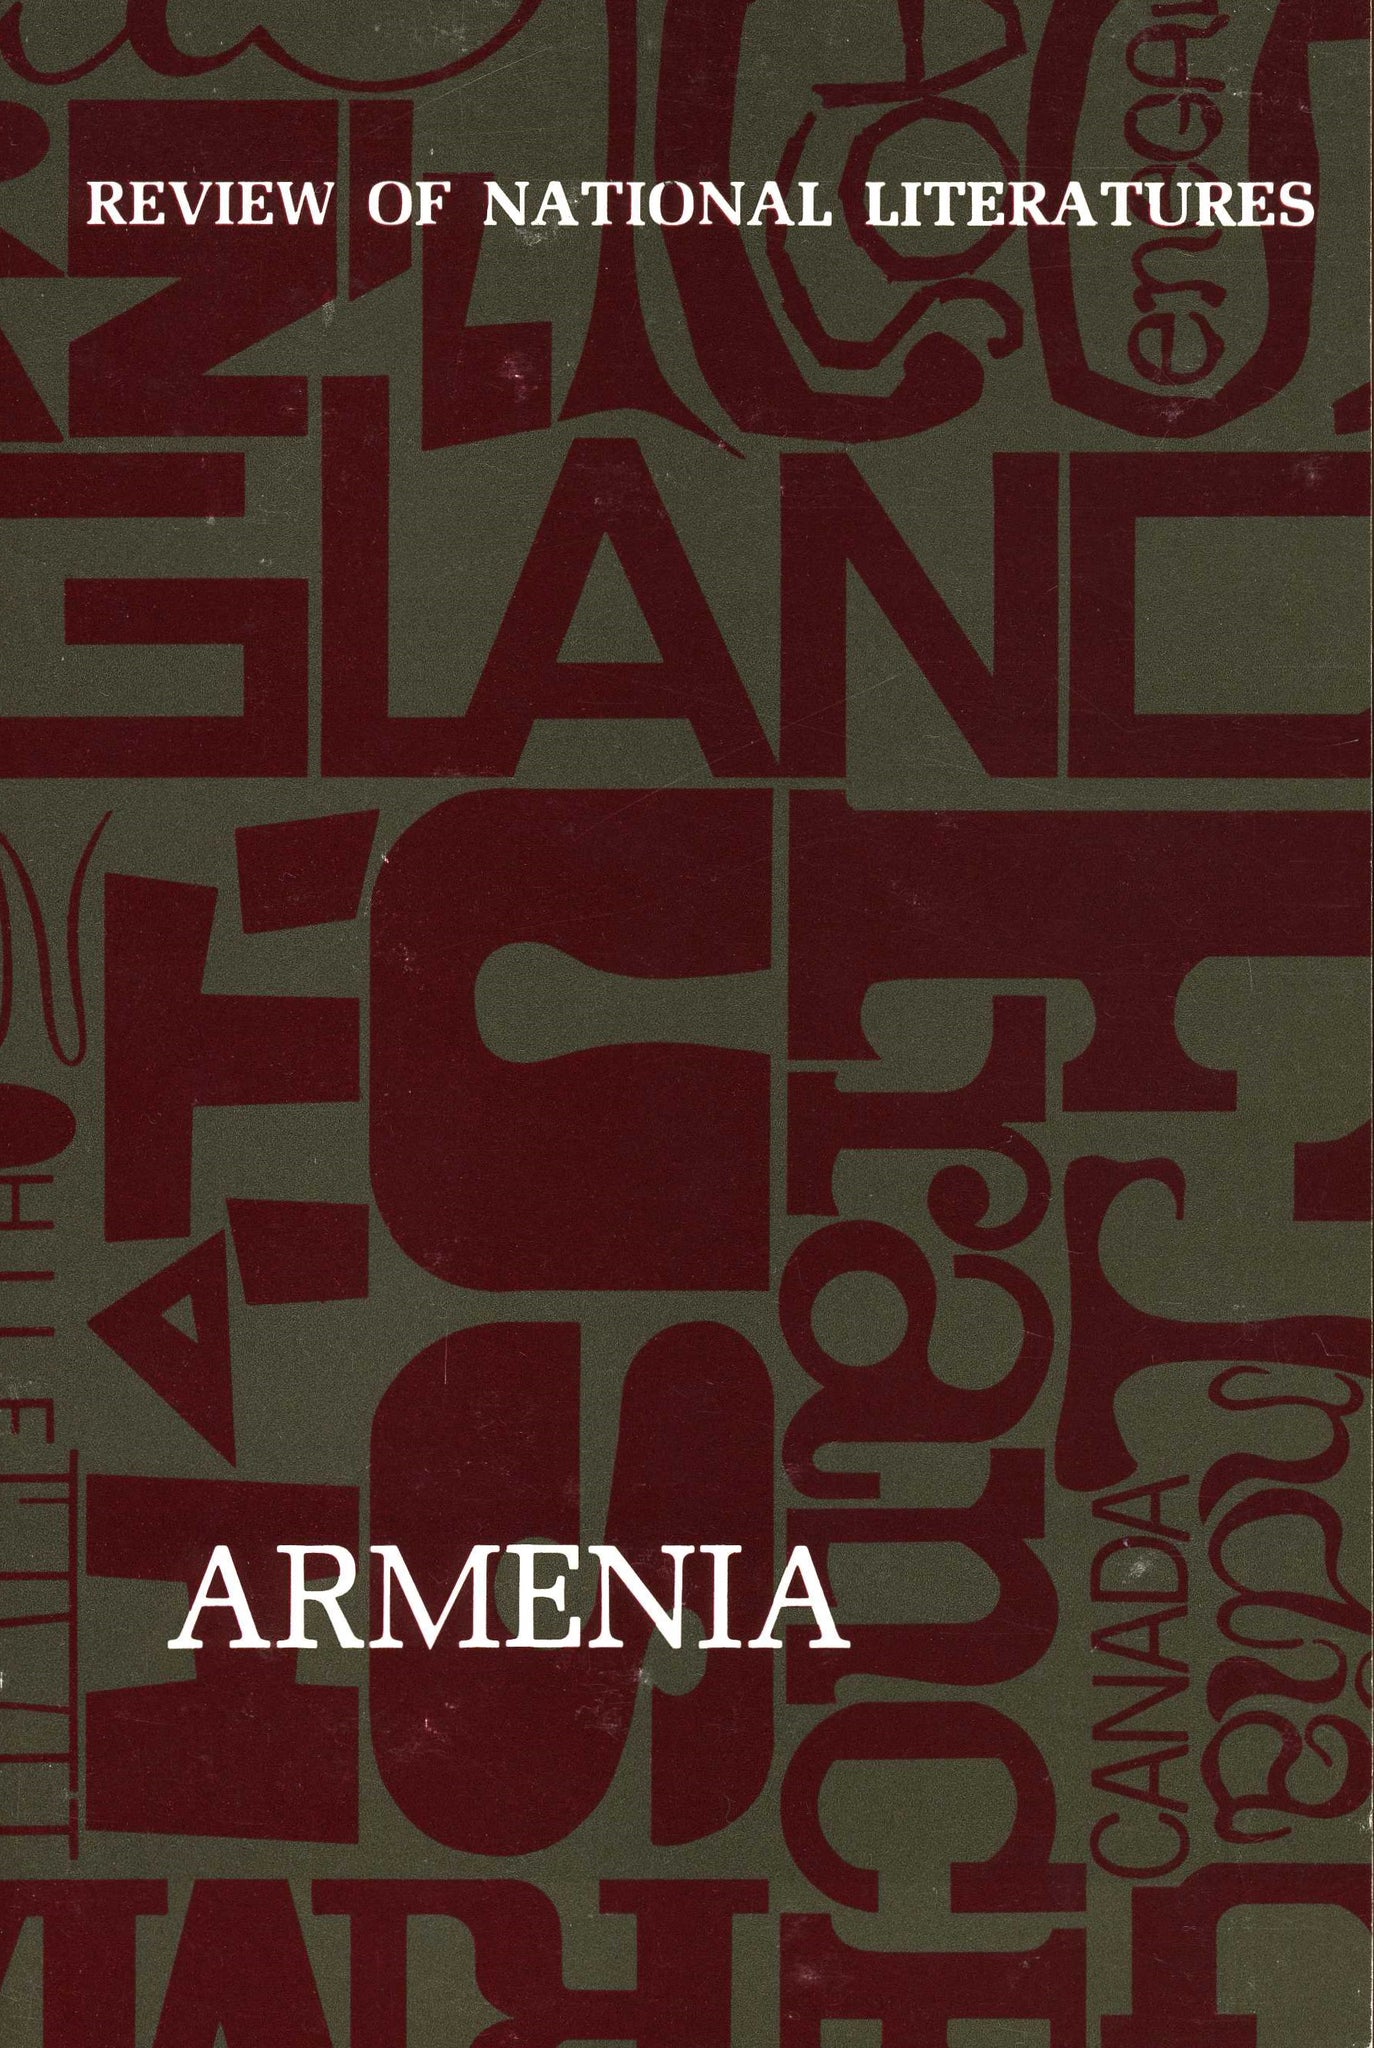 Review of National Literatures: Armenia